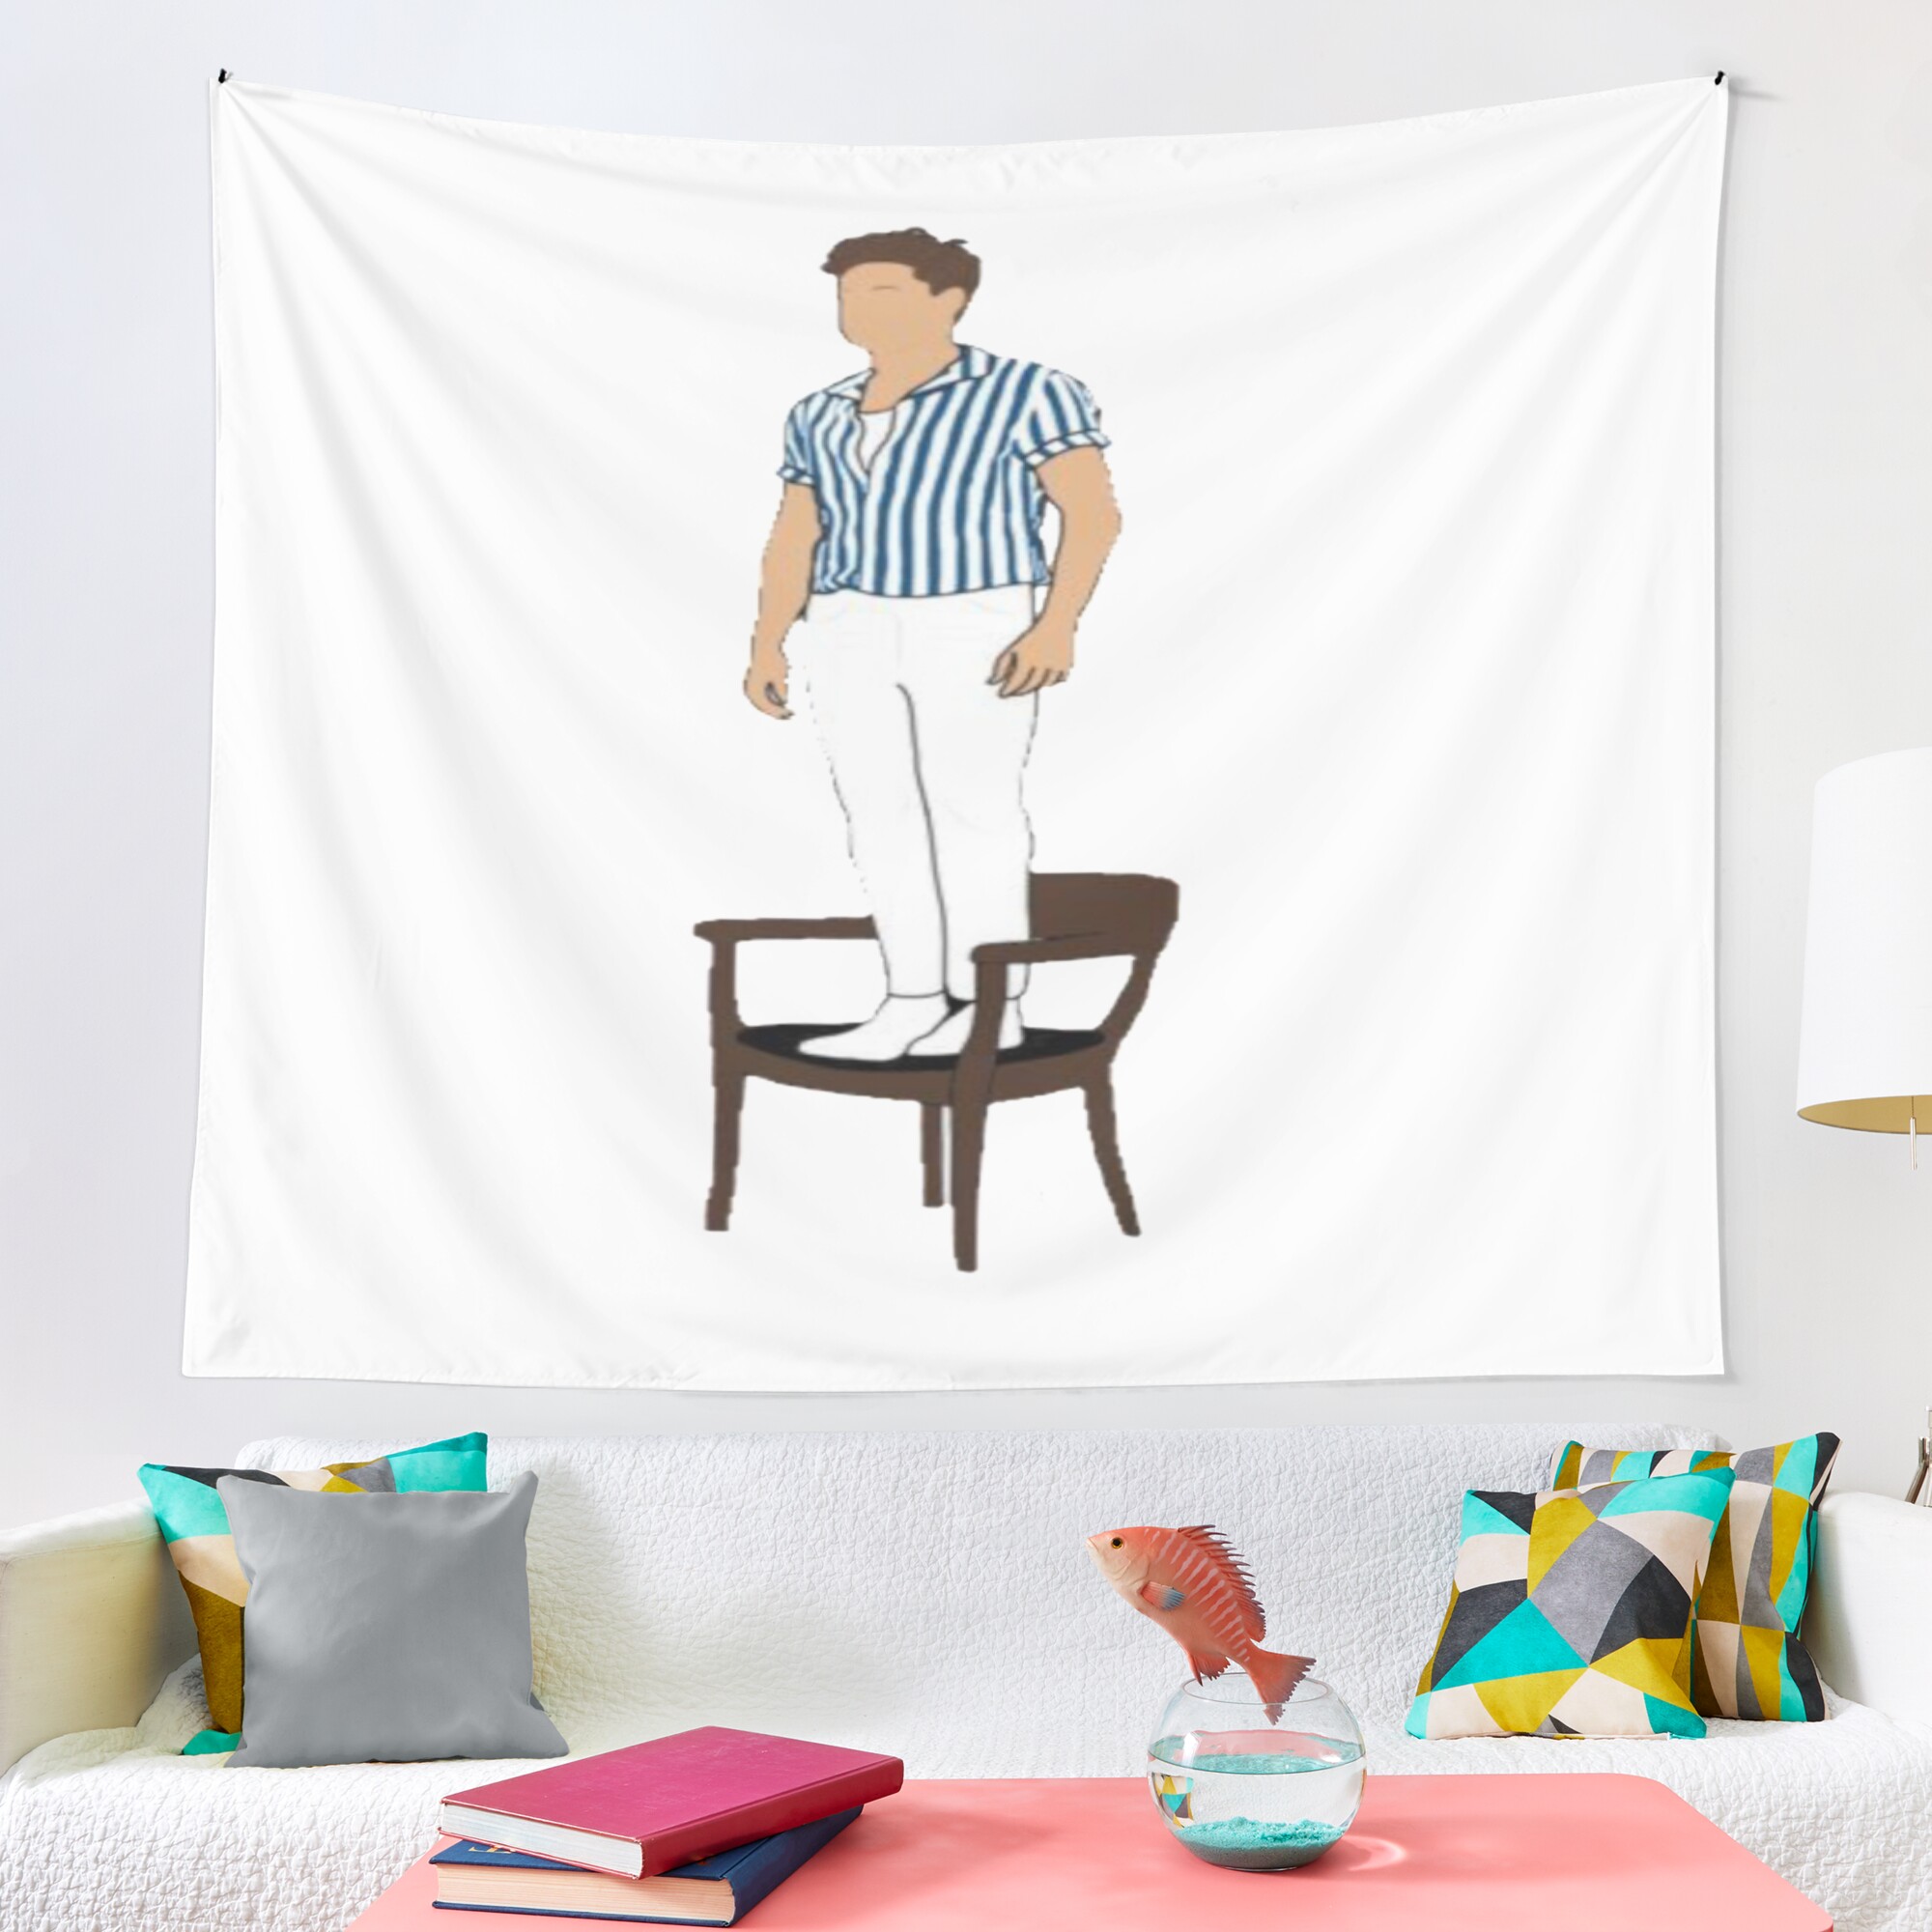 urtapestry lifestyle largesquare2000x2000 4 - Niall Horan Shop